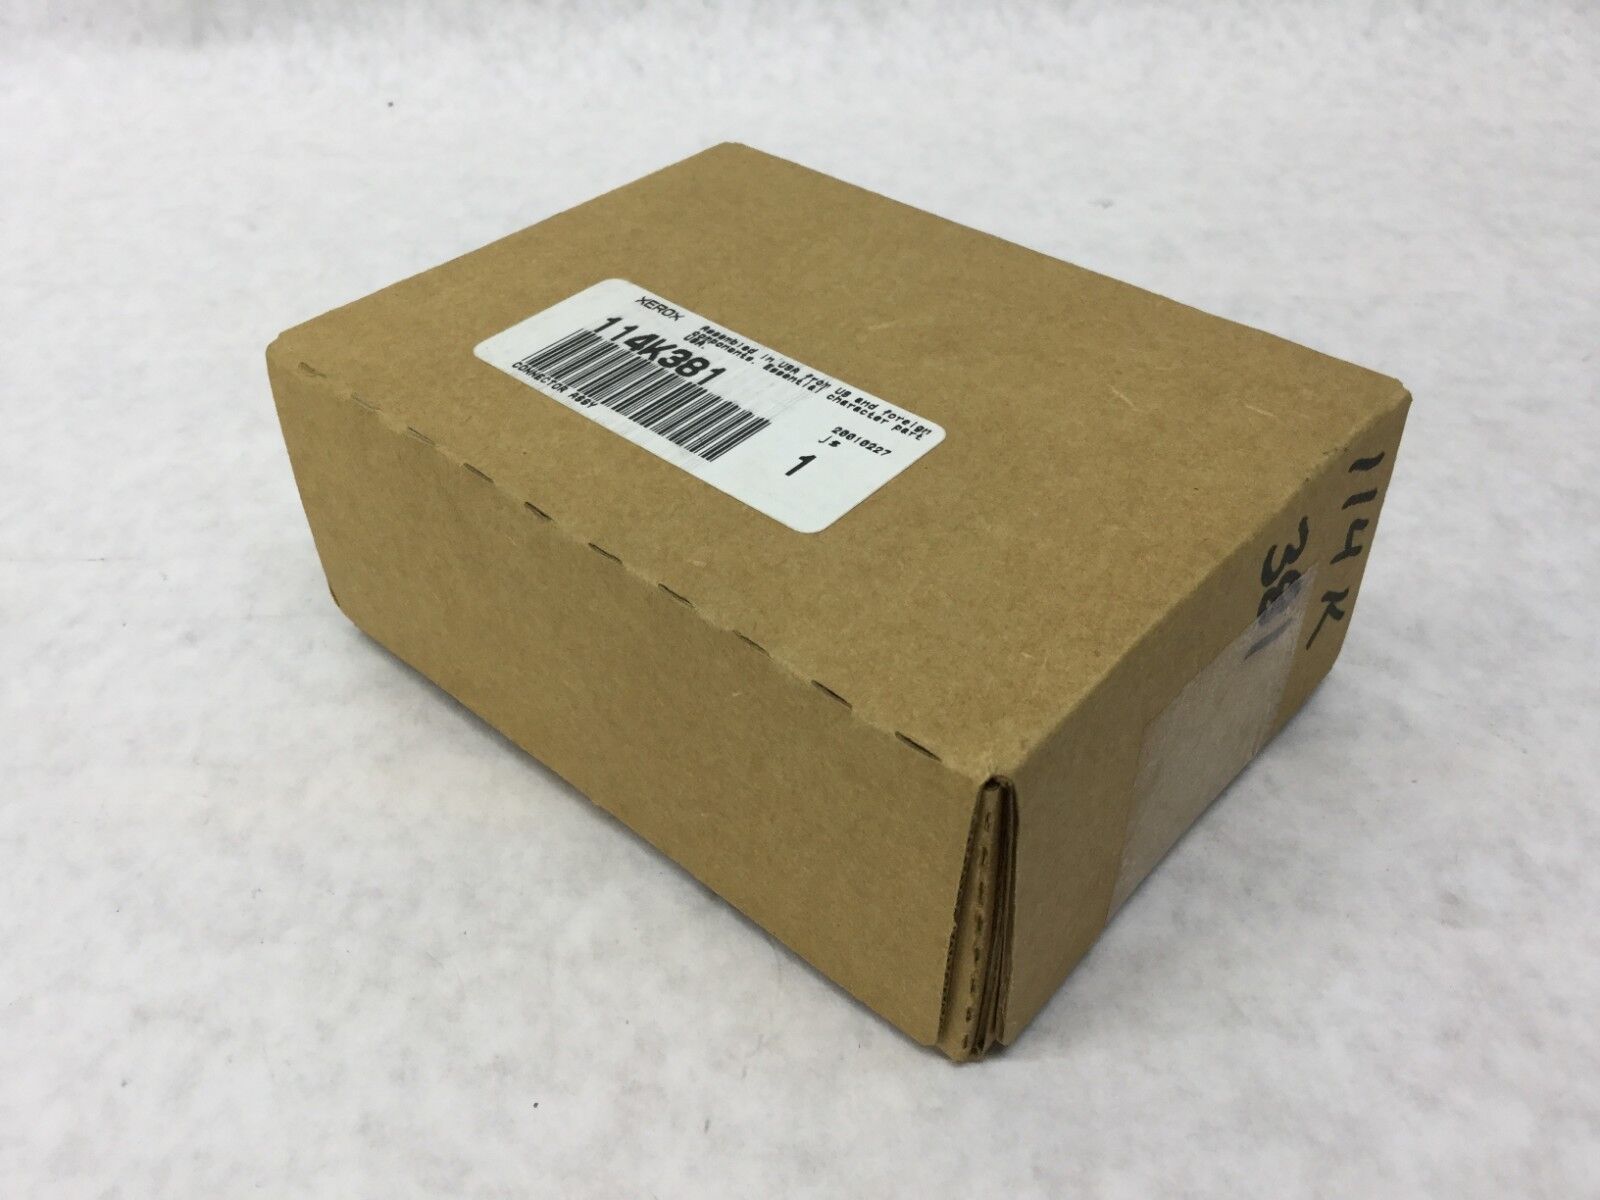 Genuine XEROX 114K381 Connector Assembly NEW in Sealed Box